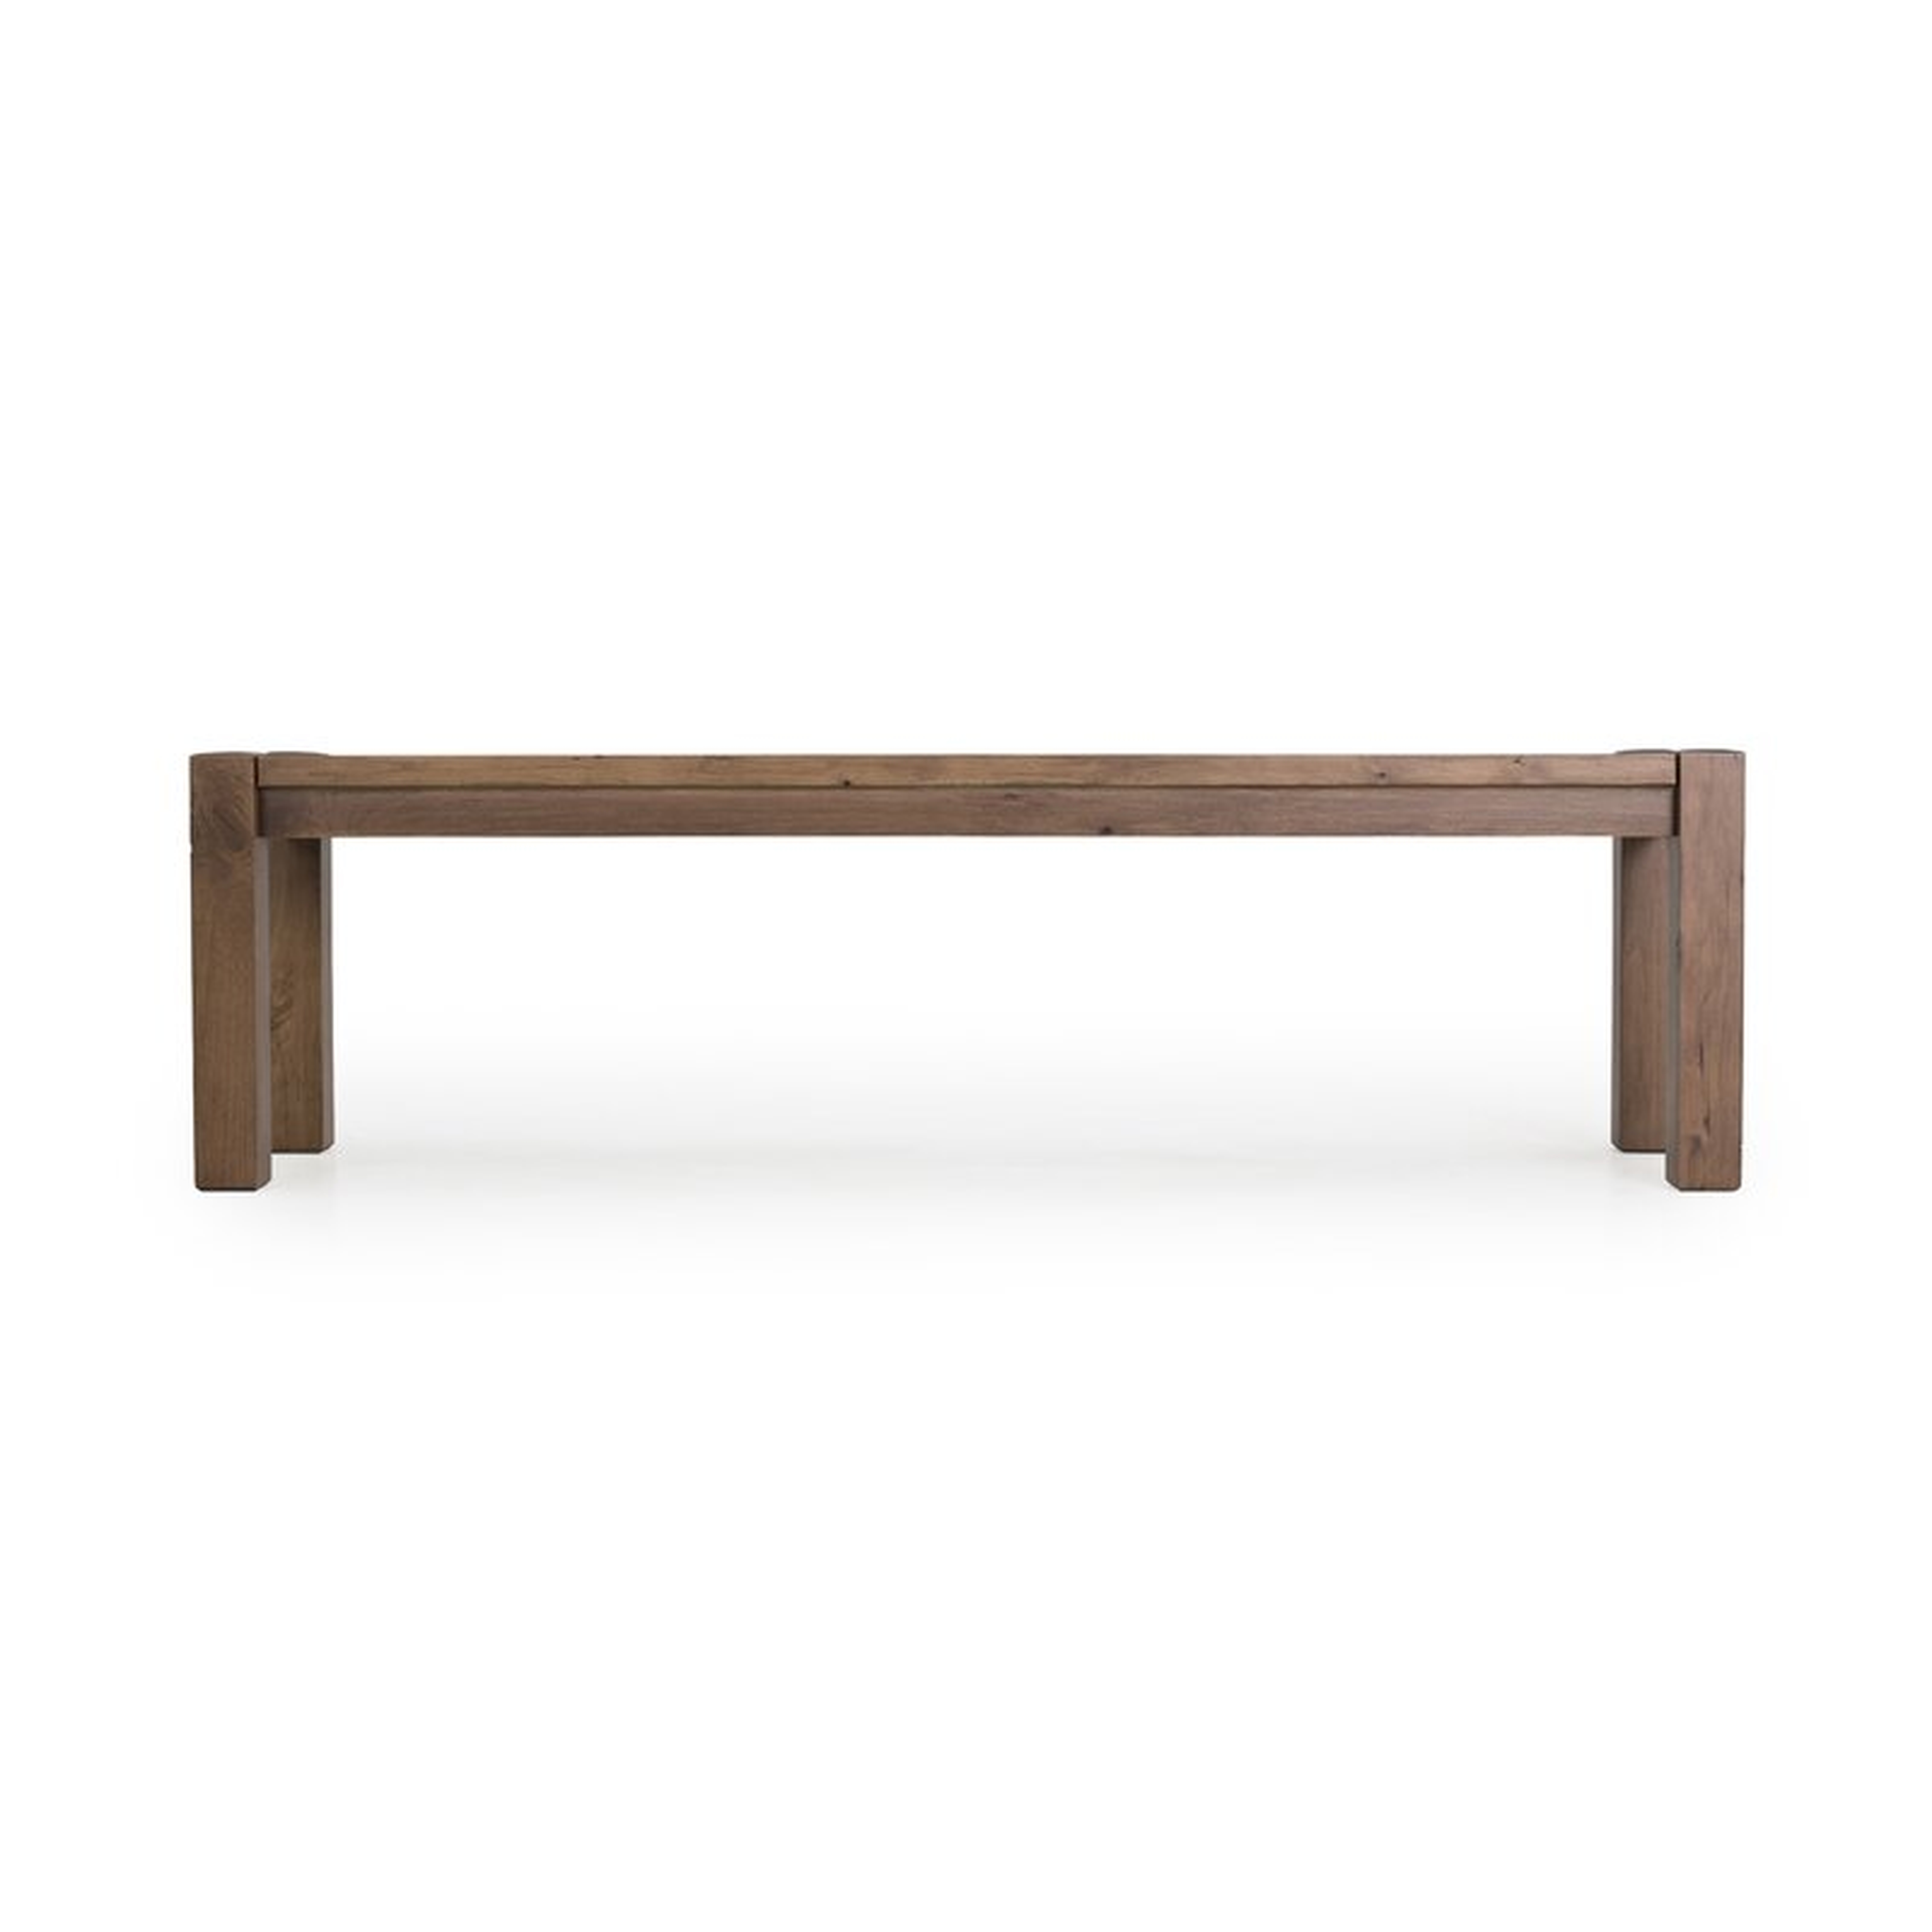 Maria Yee Rutherford Wood Bench Color: Pumpernickel - Perigold